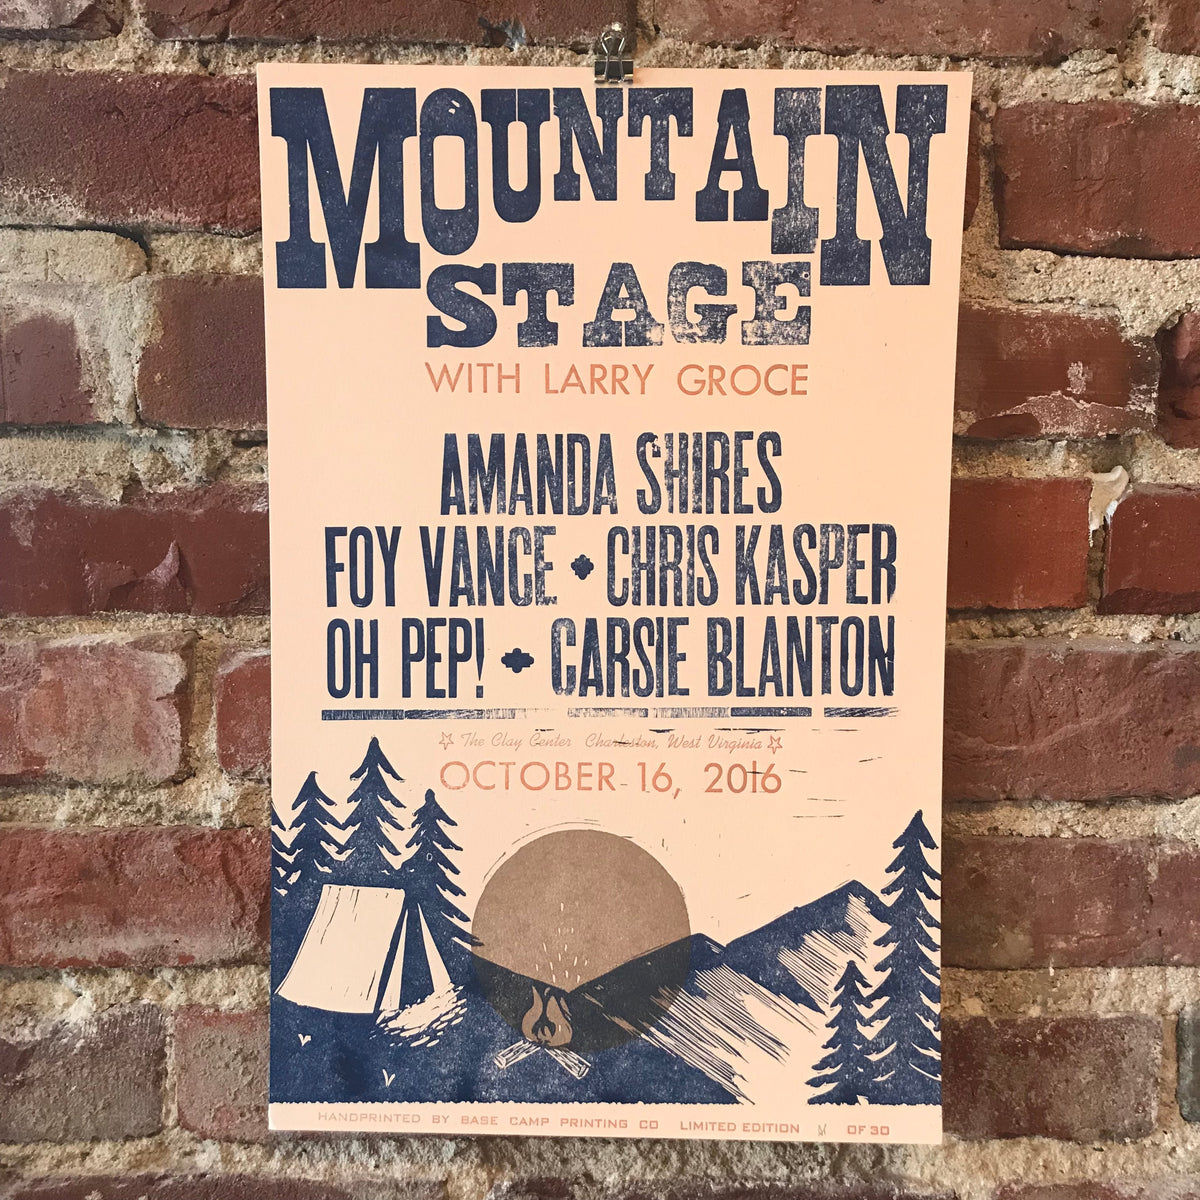 October 16th, 2016 Mountain Stage Poster